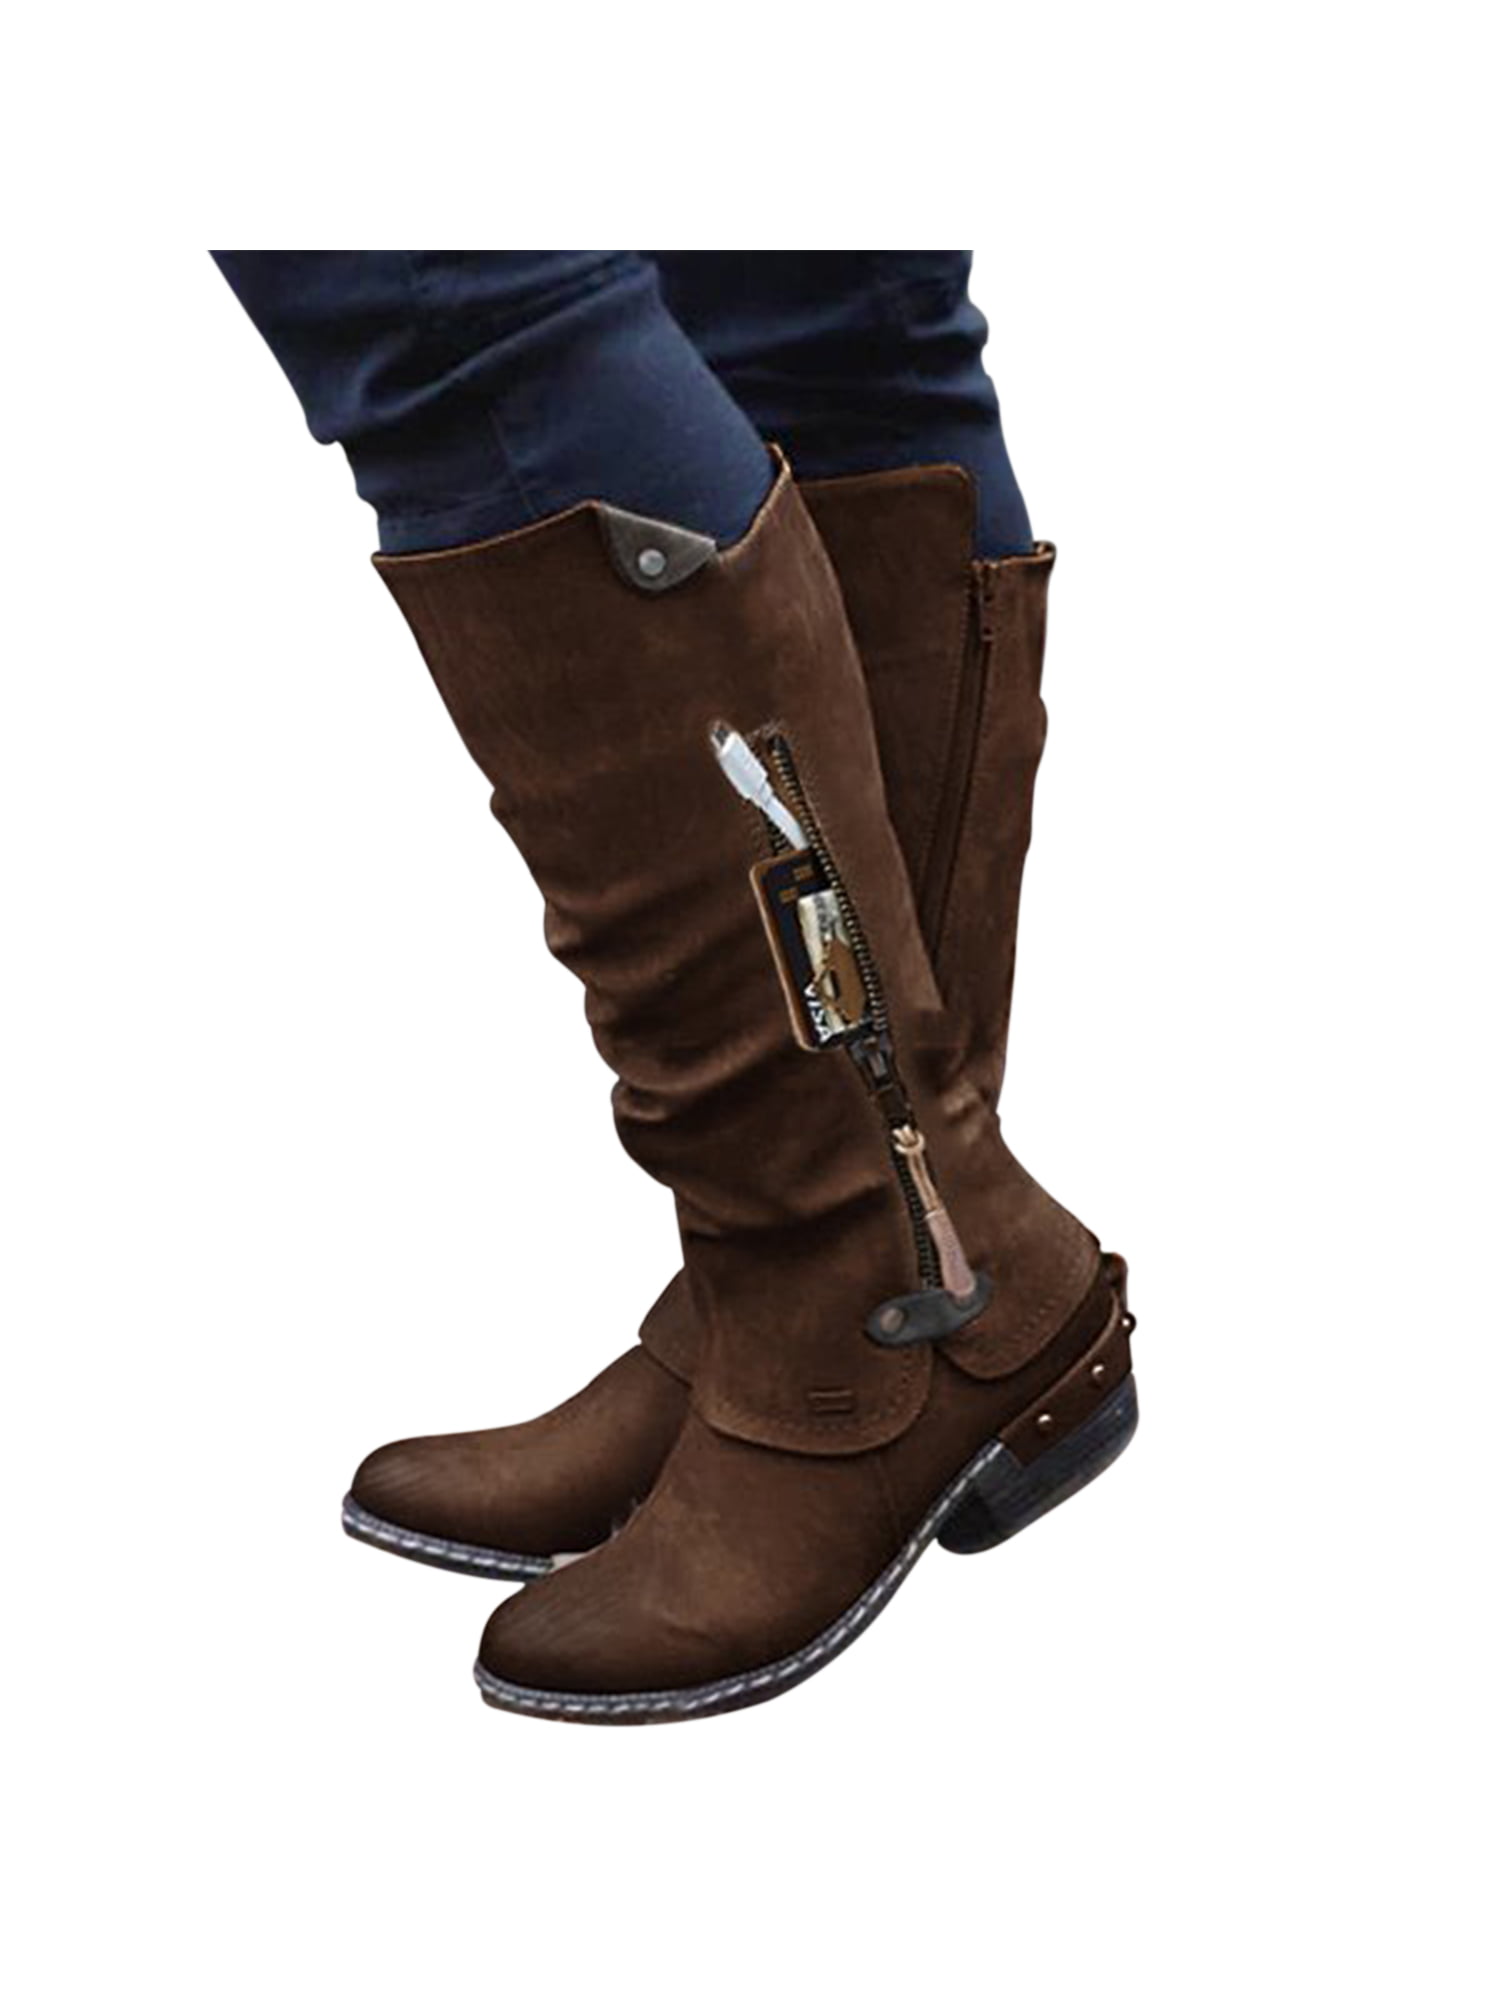 Details about   Women Thick Winter Snow Mid-calf Boots Zip Up Casual Warm Chunky Heel Booties D 